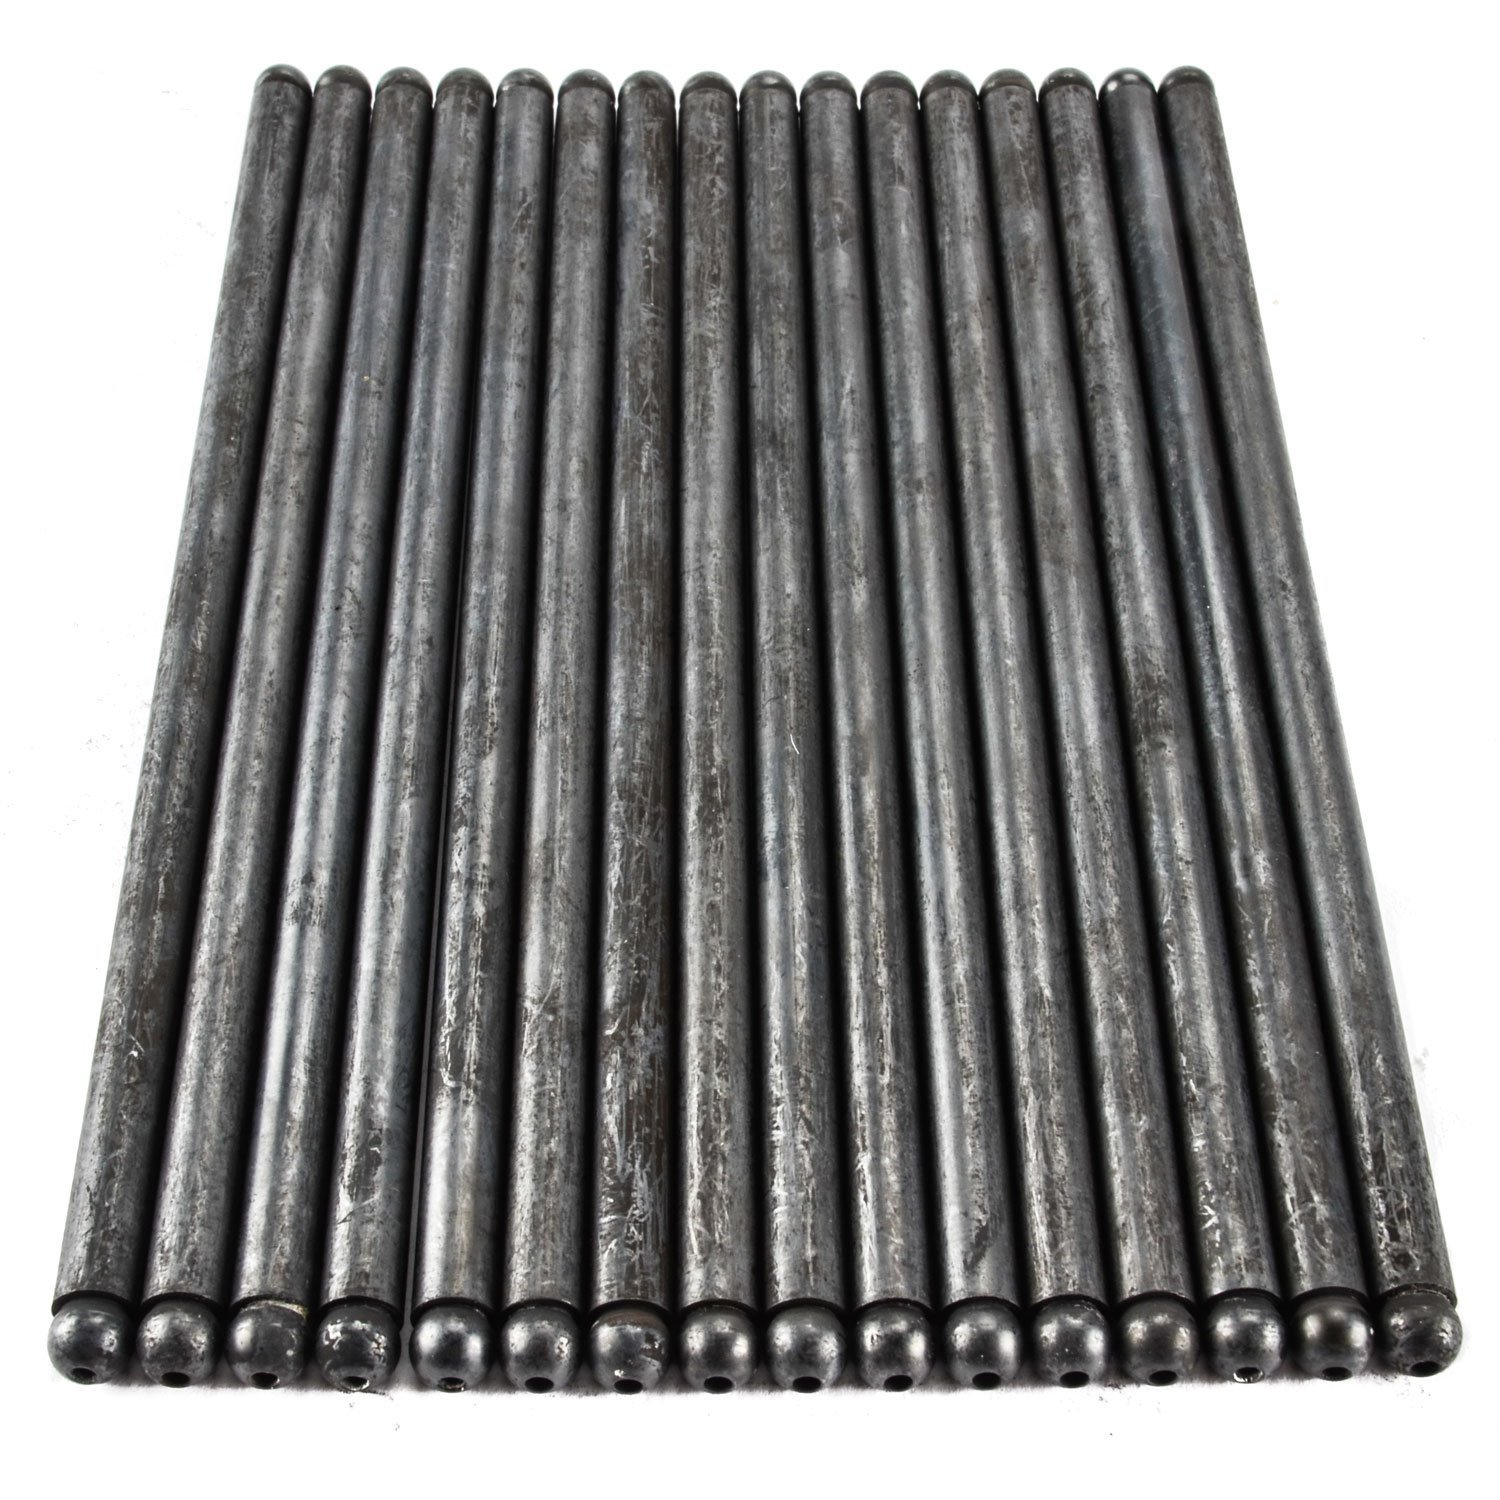 High Performance Pushrods for Small Block Chevy in Stock 7.800" Length